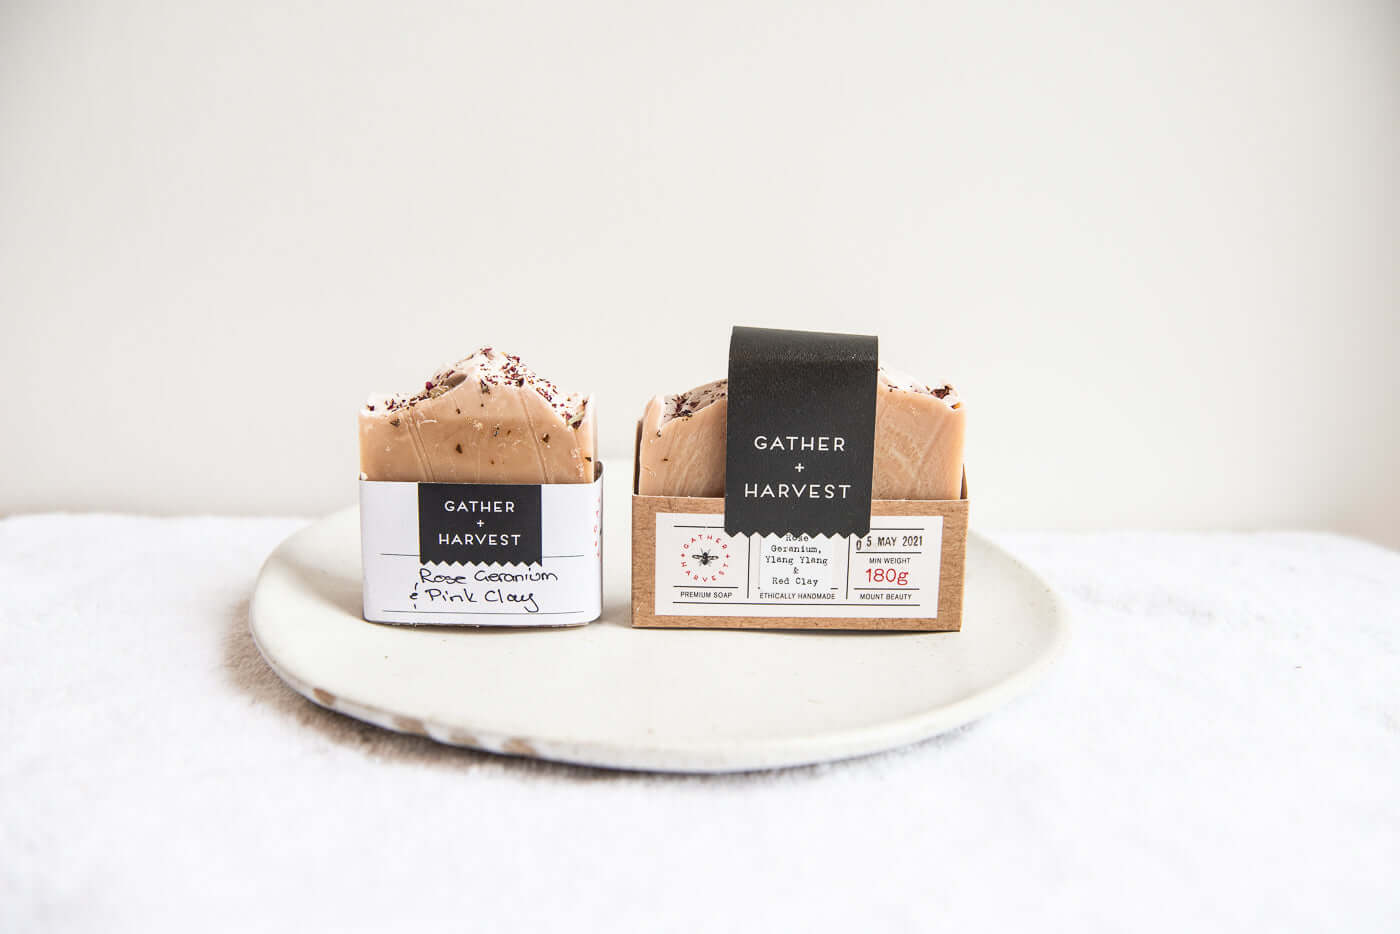 This handmade natural soap with Rose Geranium, Ylang Ylang & Australian Red Clay Soap deeply nourishes your skin